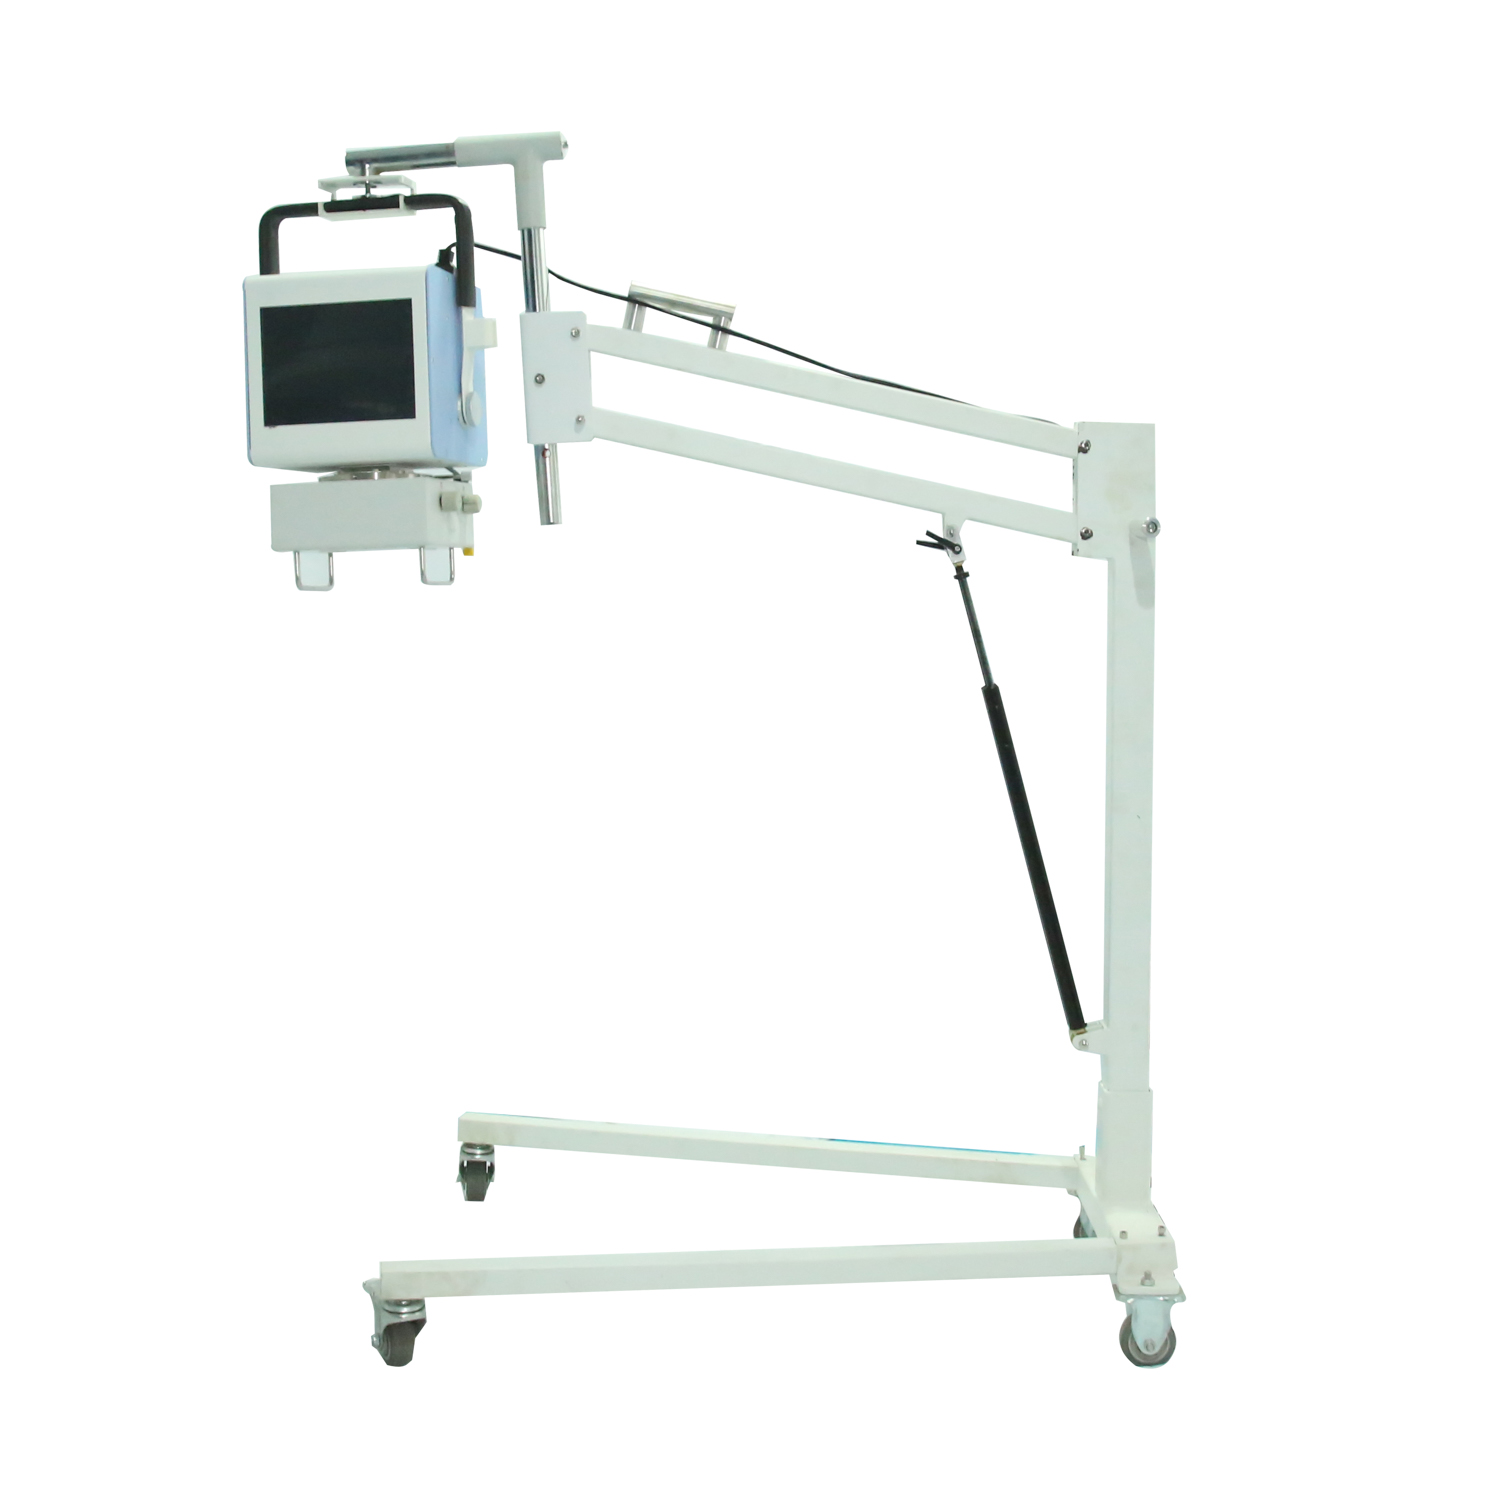 5kW 100mA High frequency portable & mobile x-ray machine